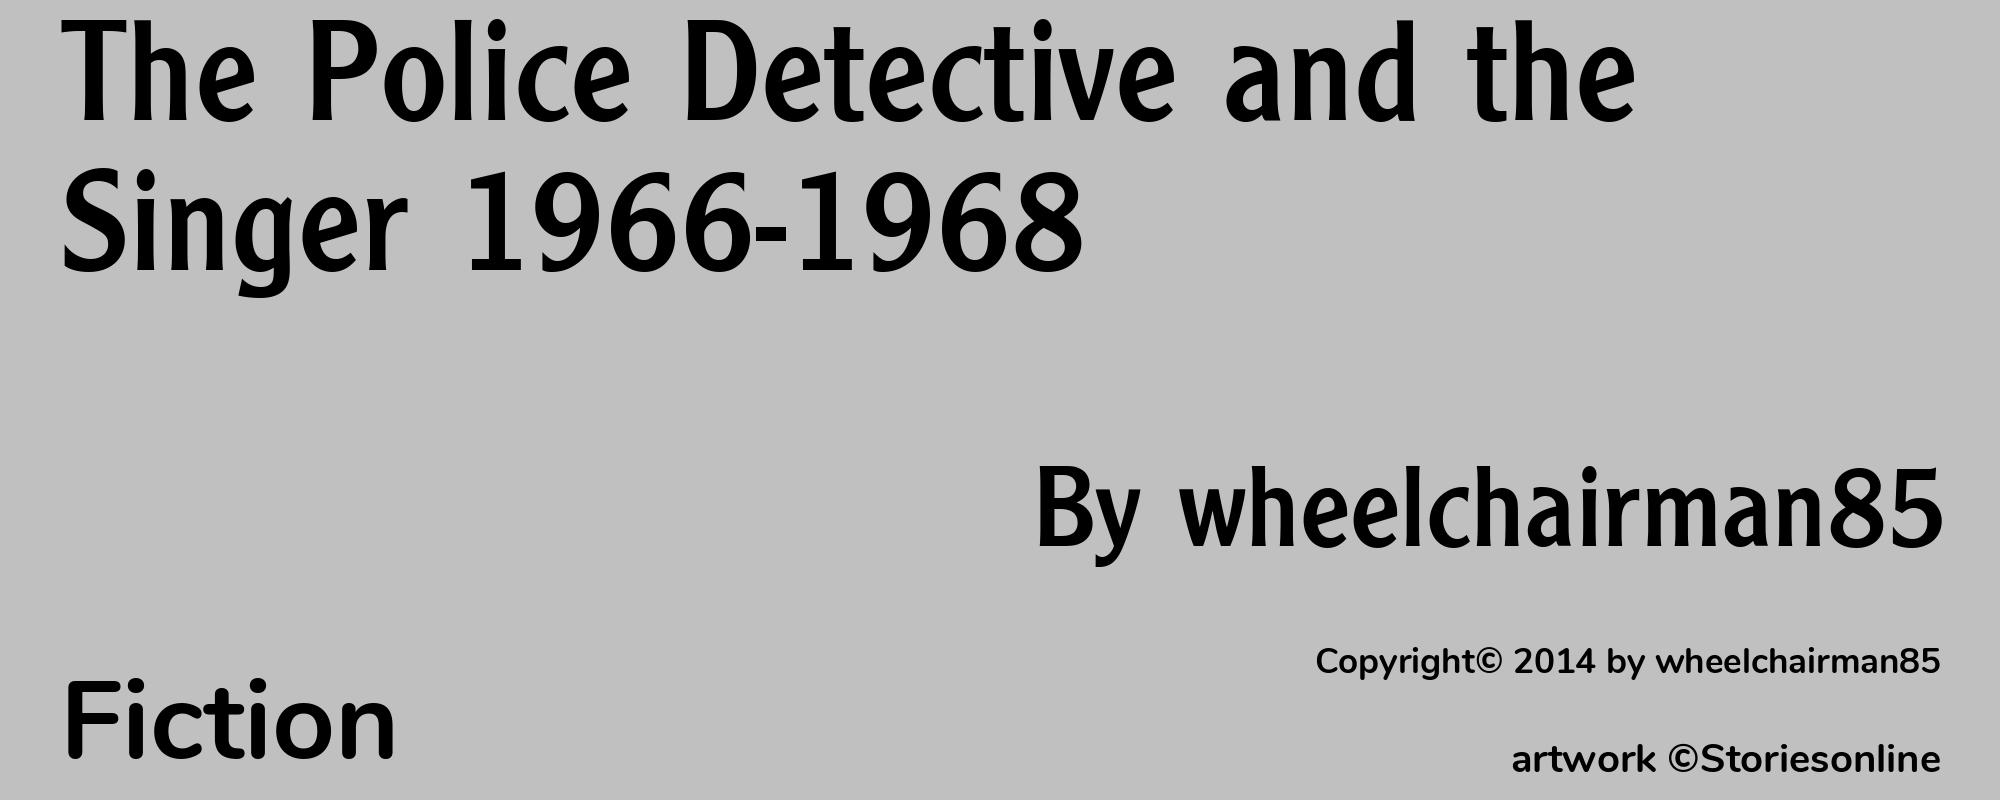 The Police Detective and the Singer 1966-1968 - Cover